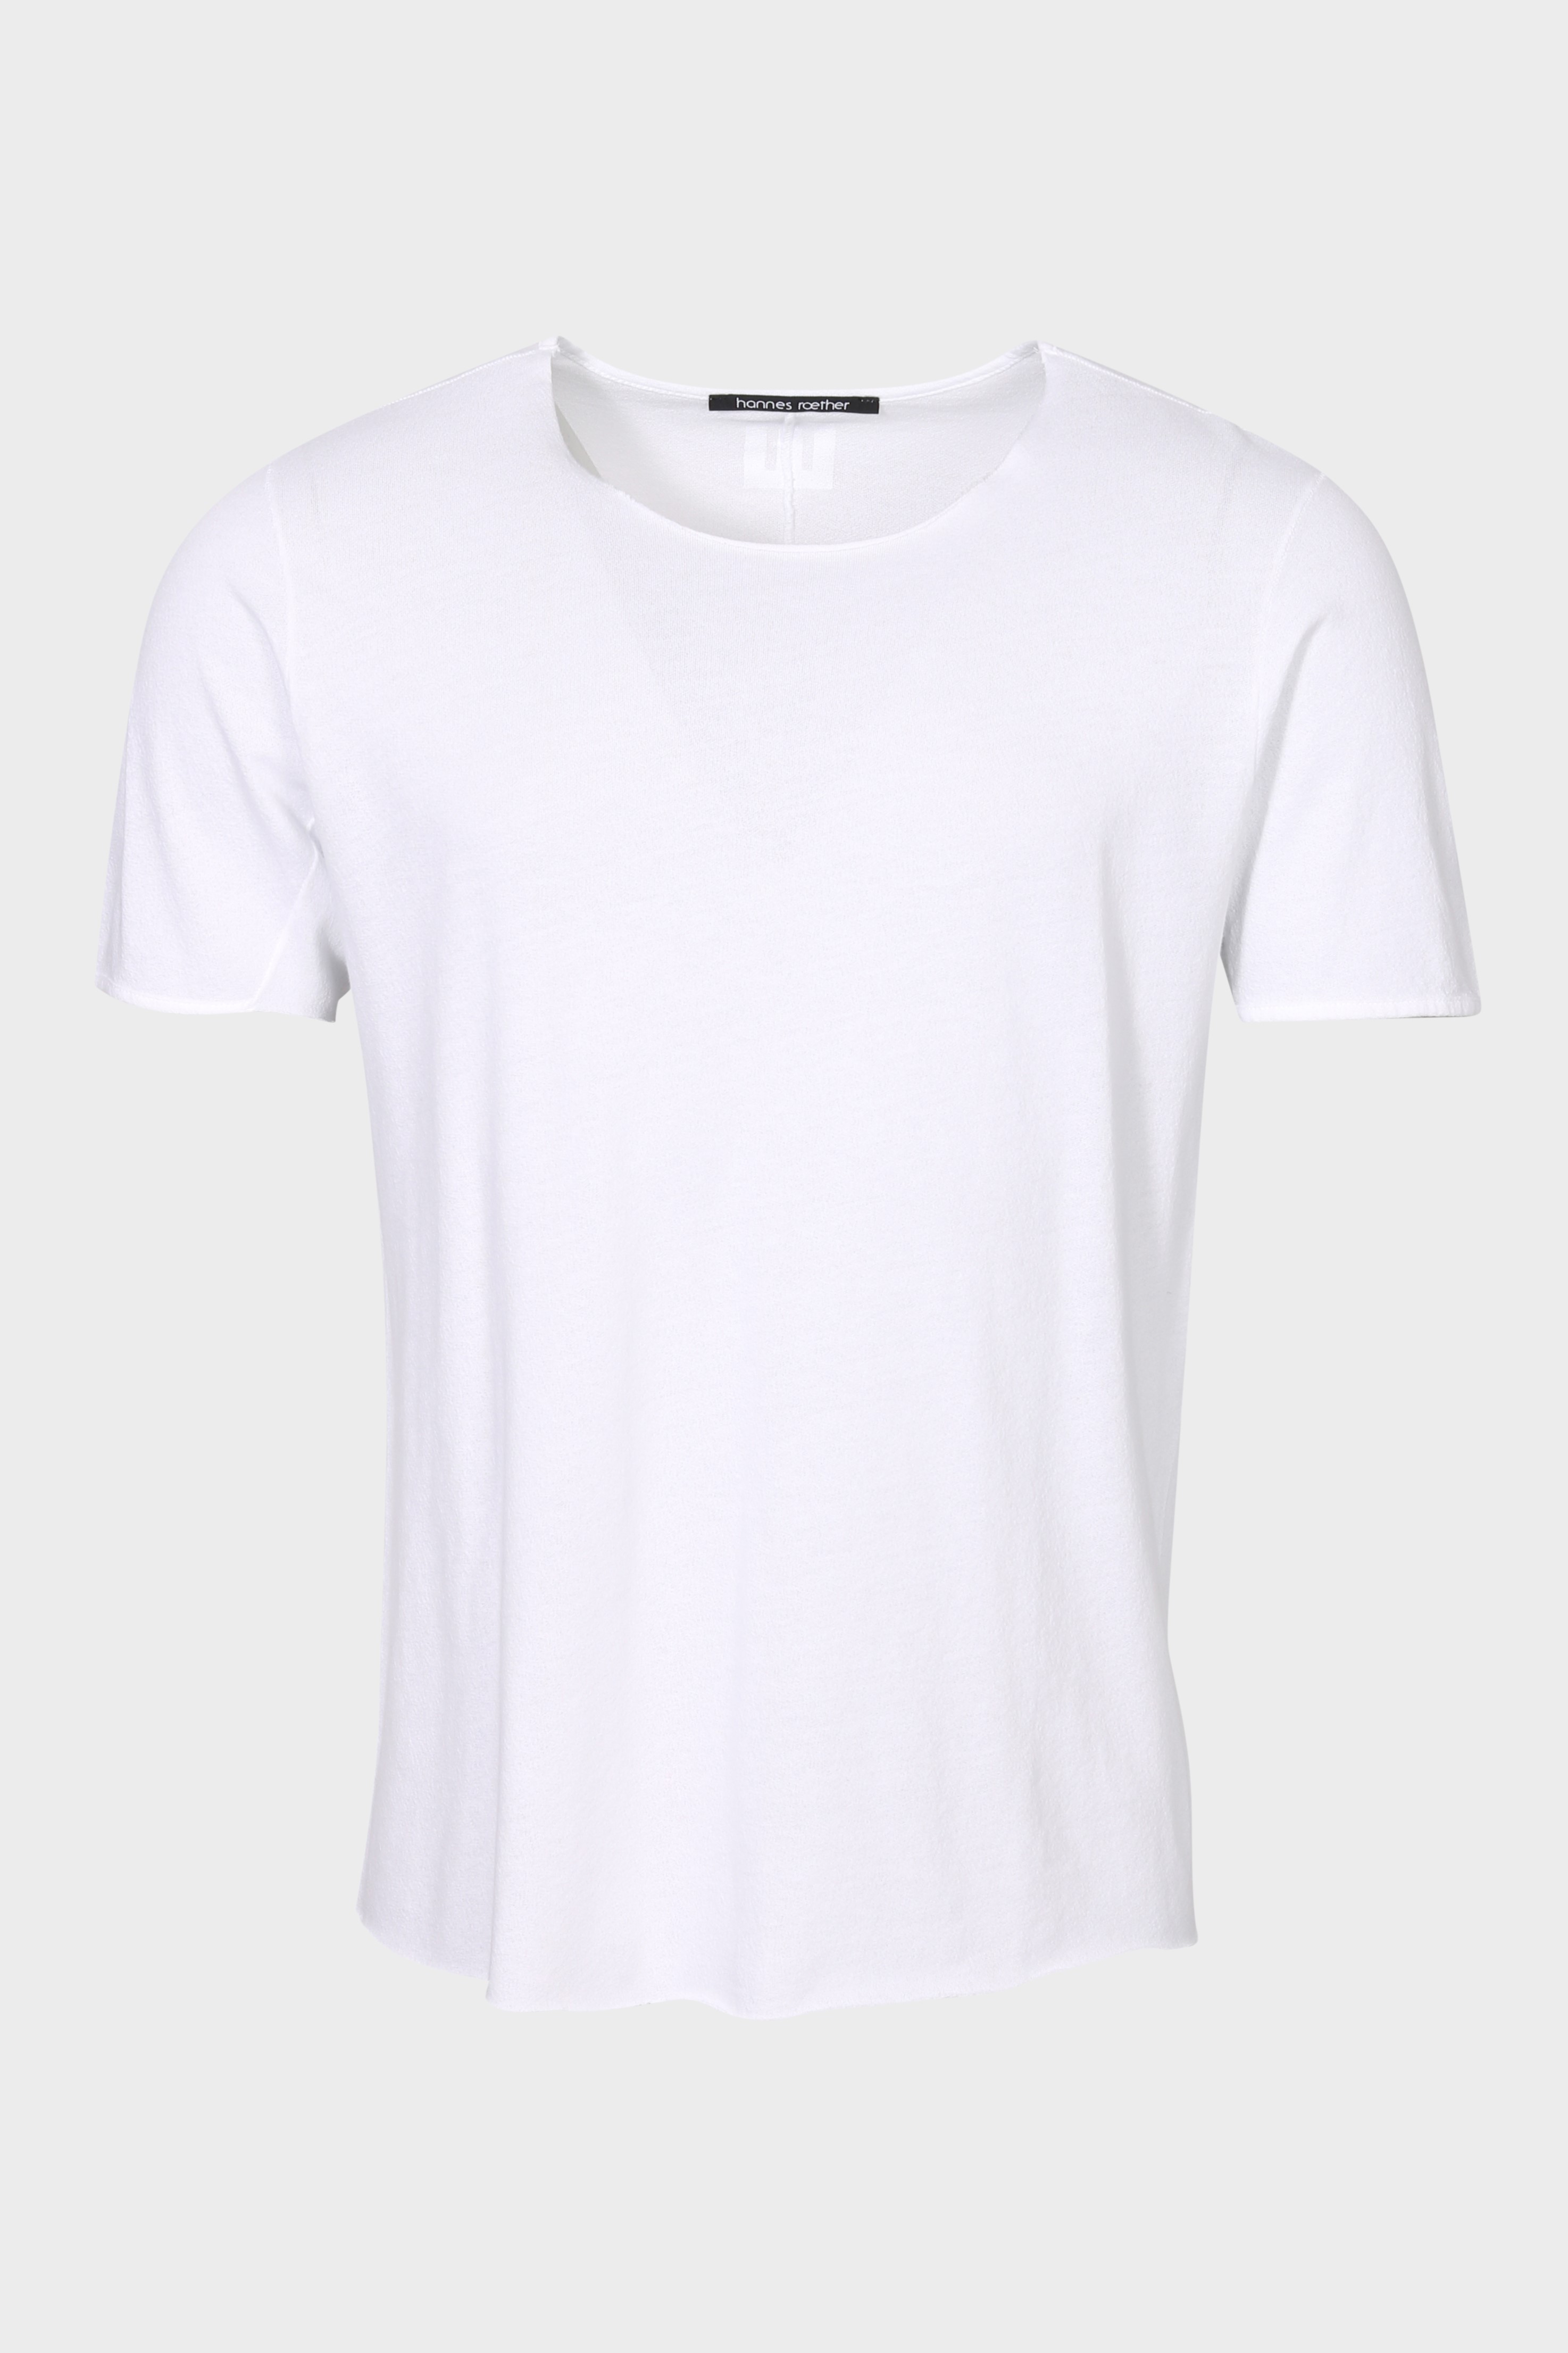 HANNES ROETHER T-Shirt in White